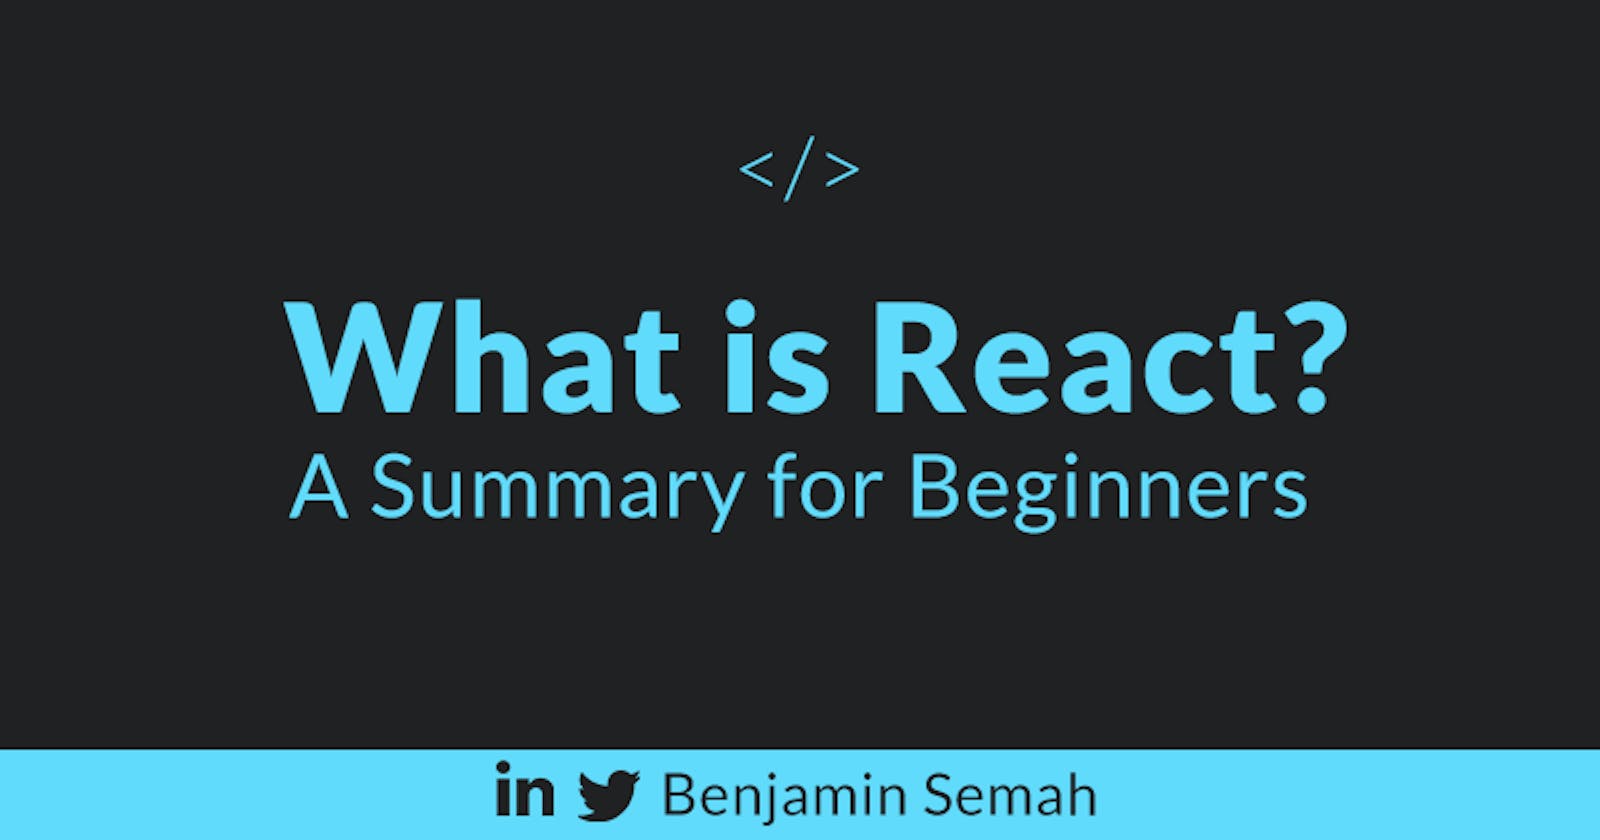 What Is React? A Summary for Beginners